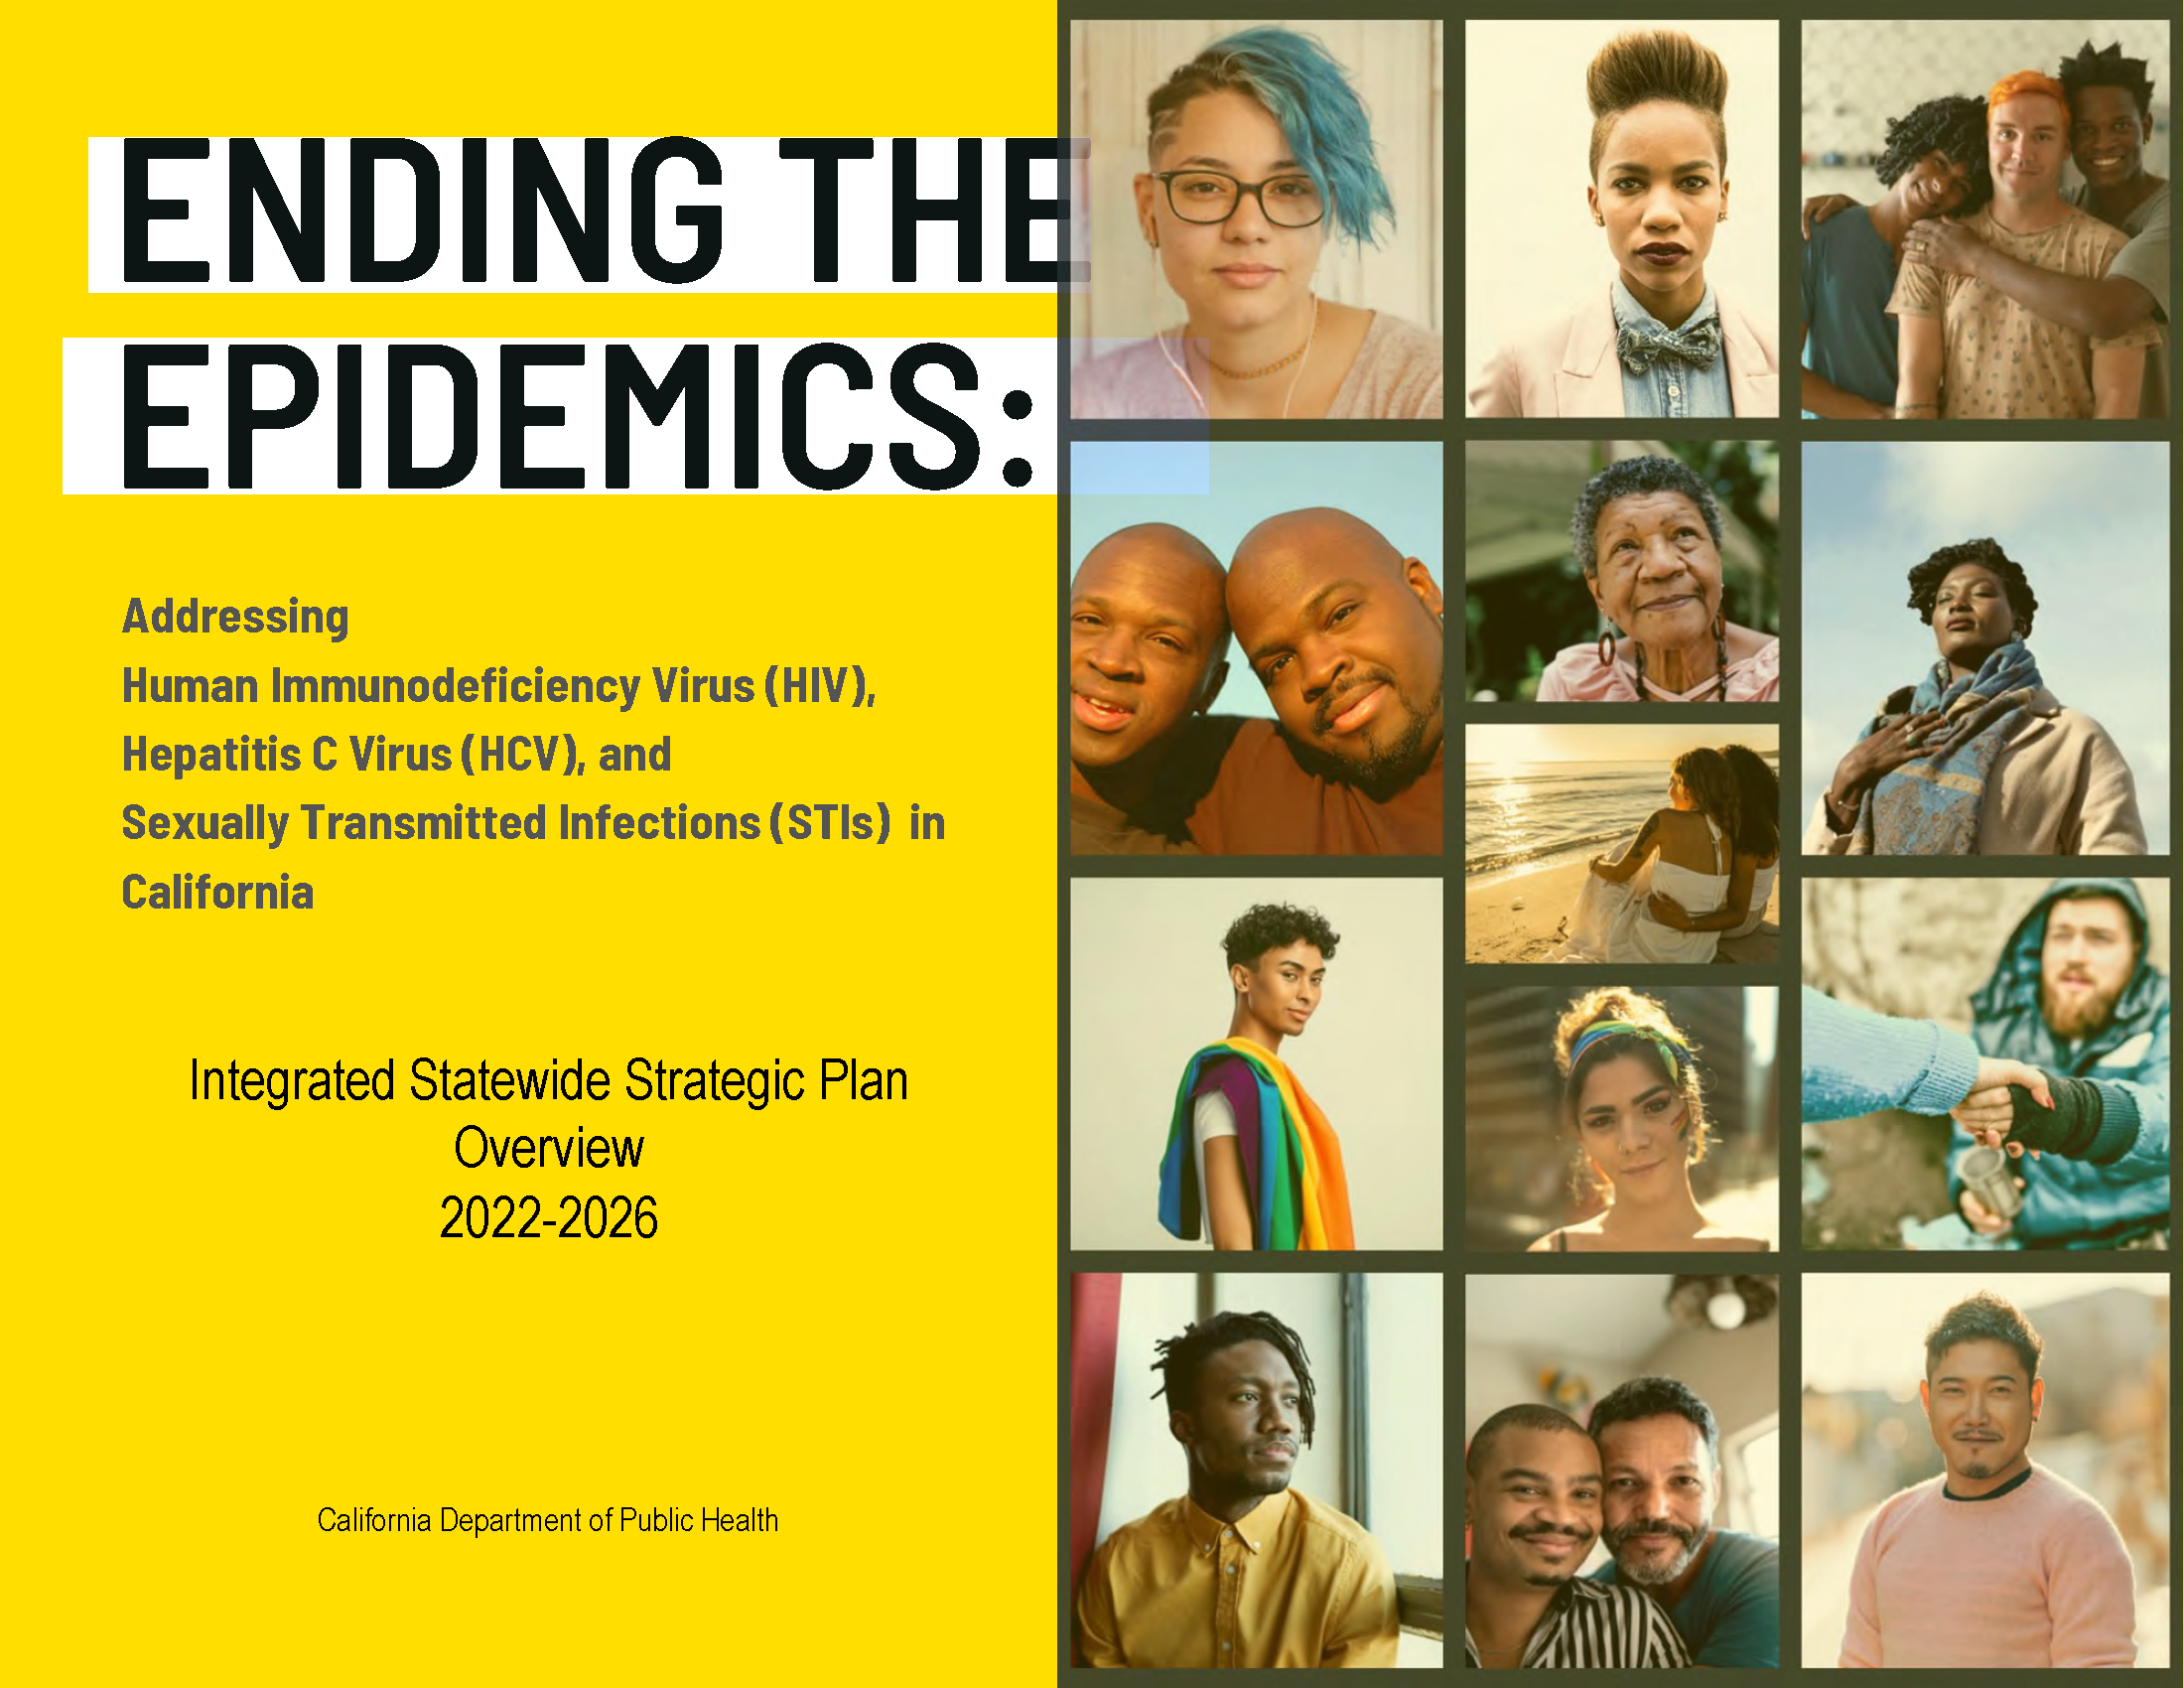 image of the cover of the strategic plan, with people of many diverse ages, genders, and ethnicities.